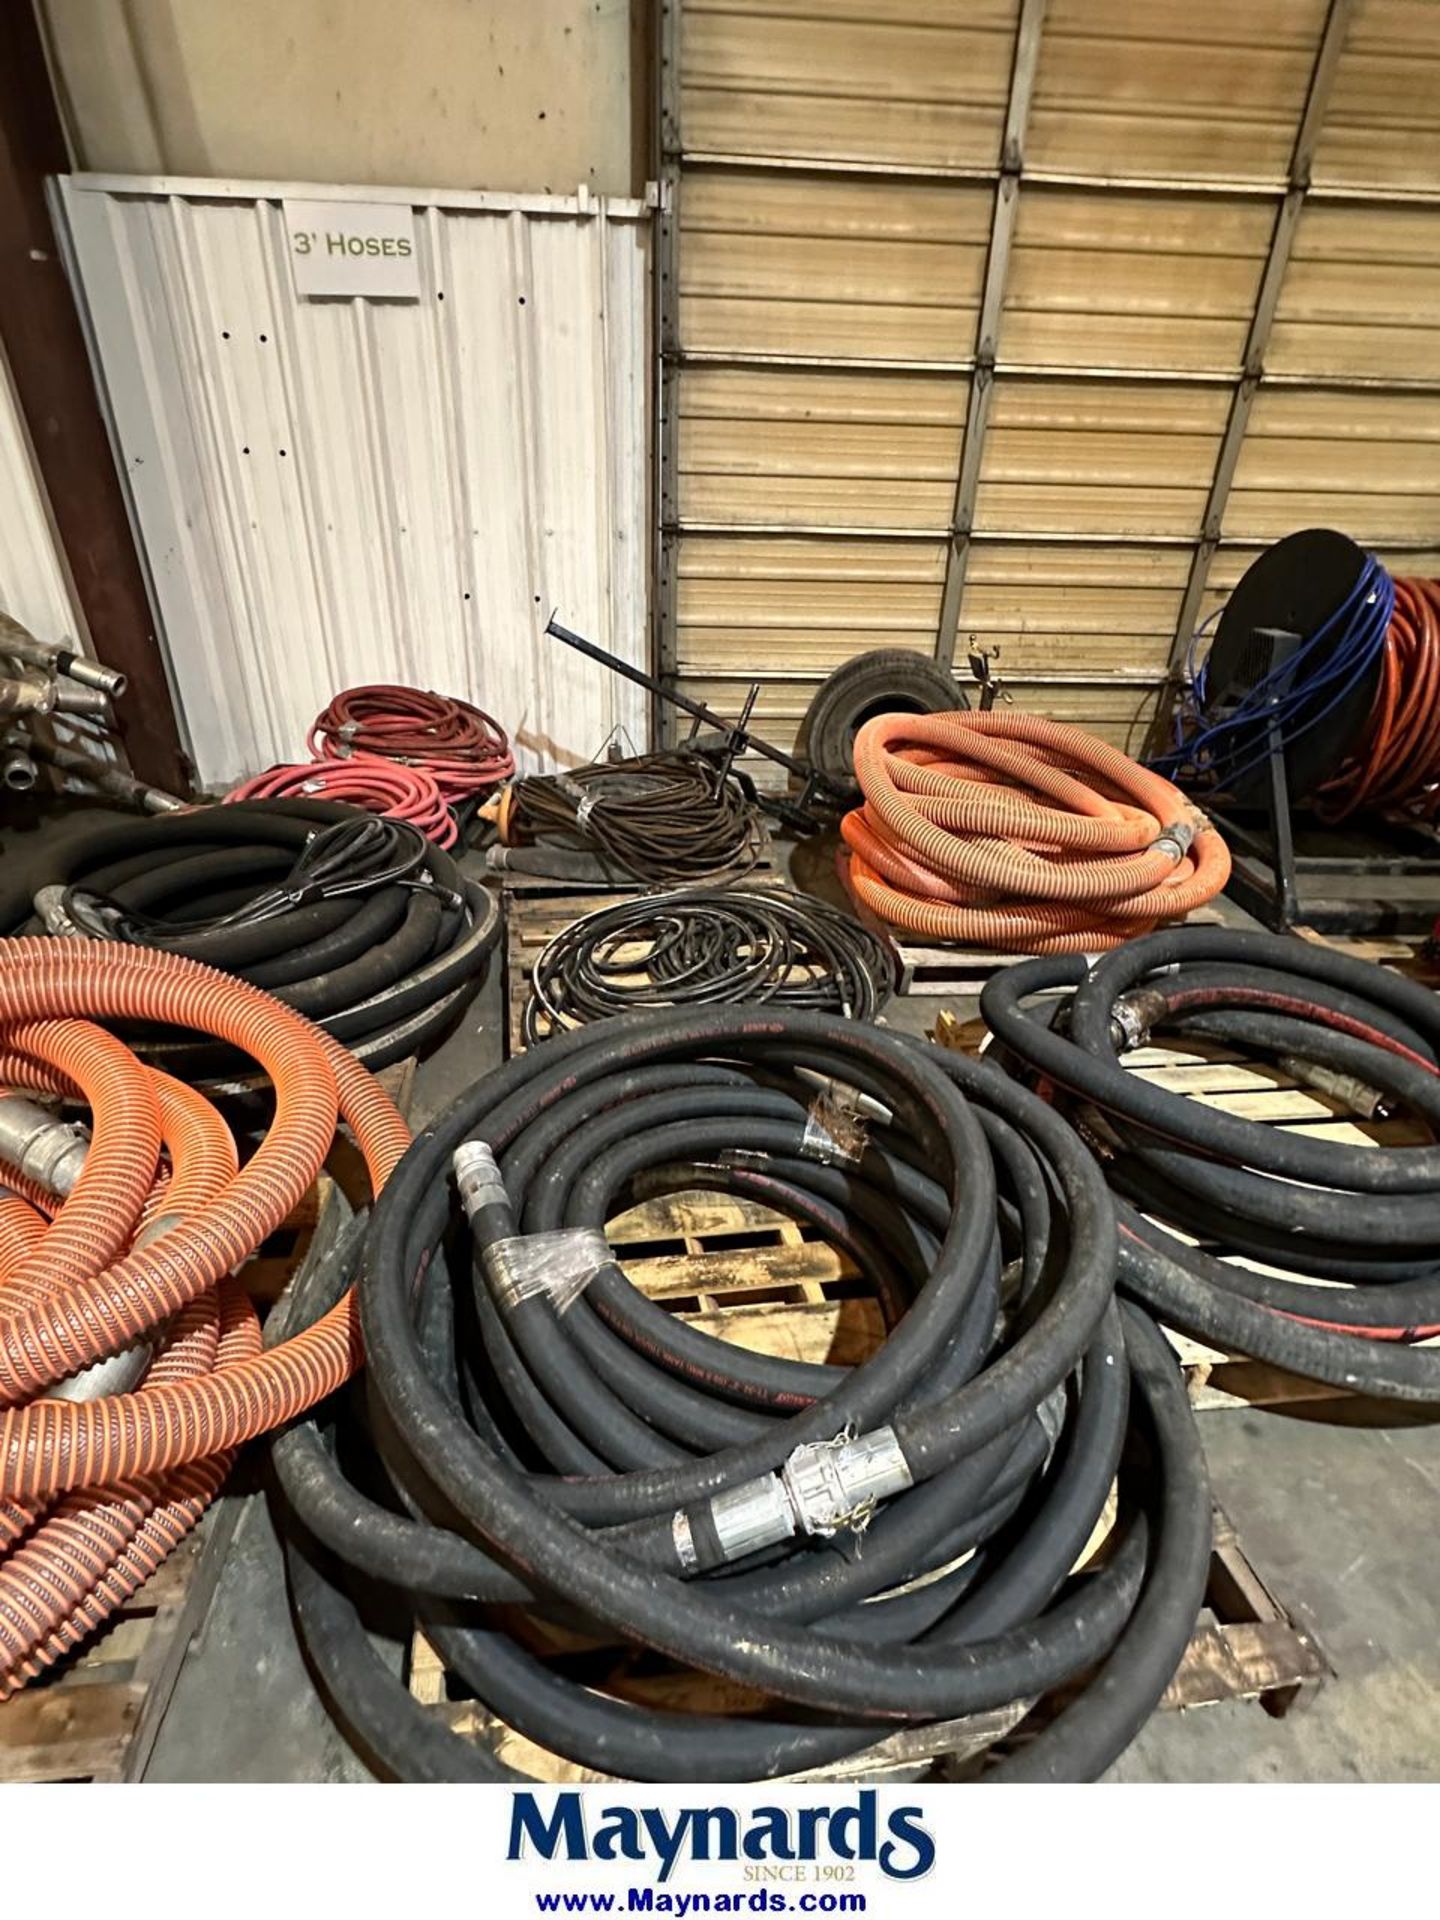 Lot of Hoses and Rack - Image 5 of 6